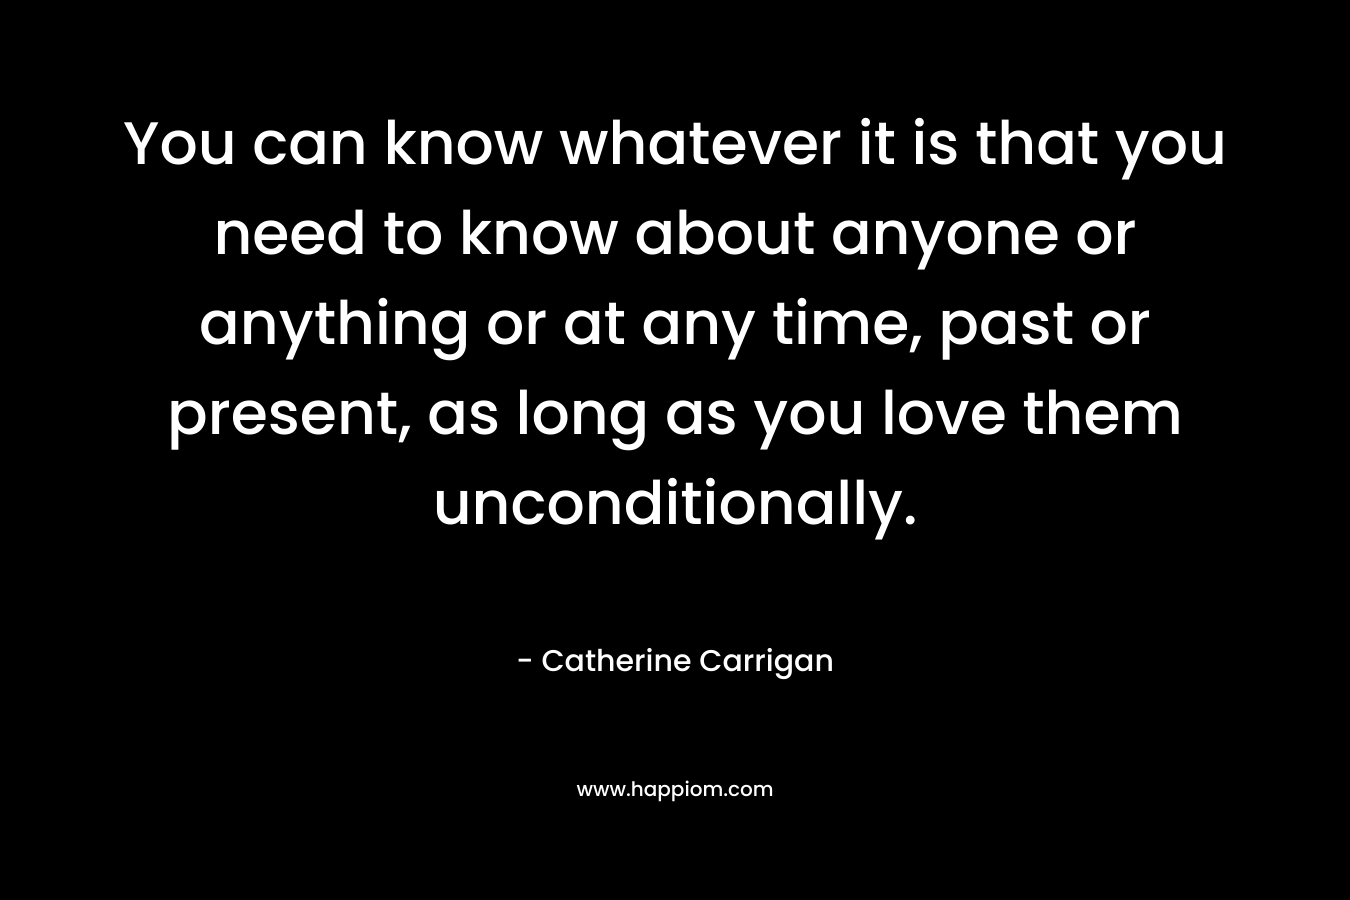 You can know whatever it is that you need to know about anyone or anything or at any time, past or present, as long as you love them unconditionally.